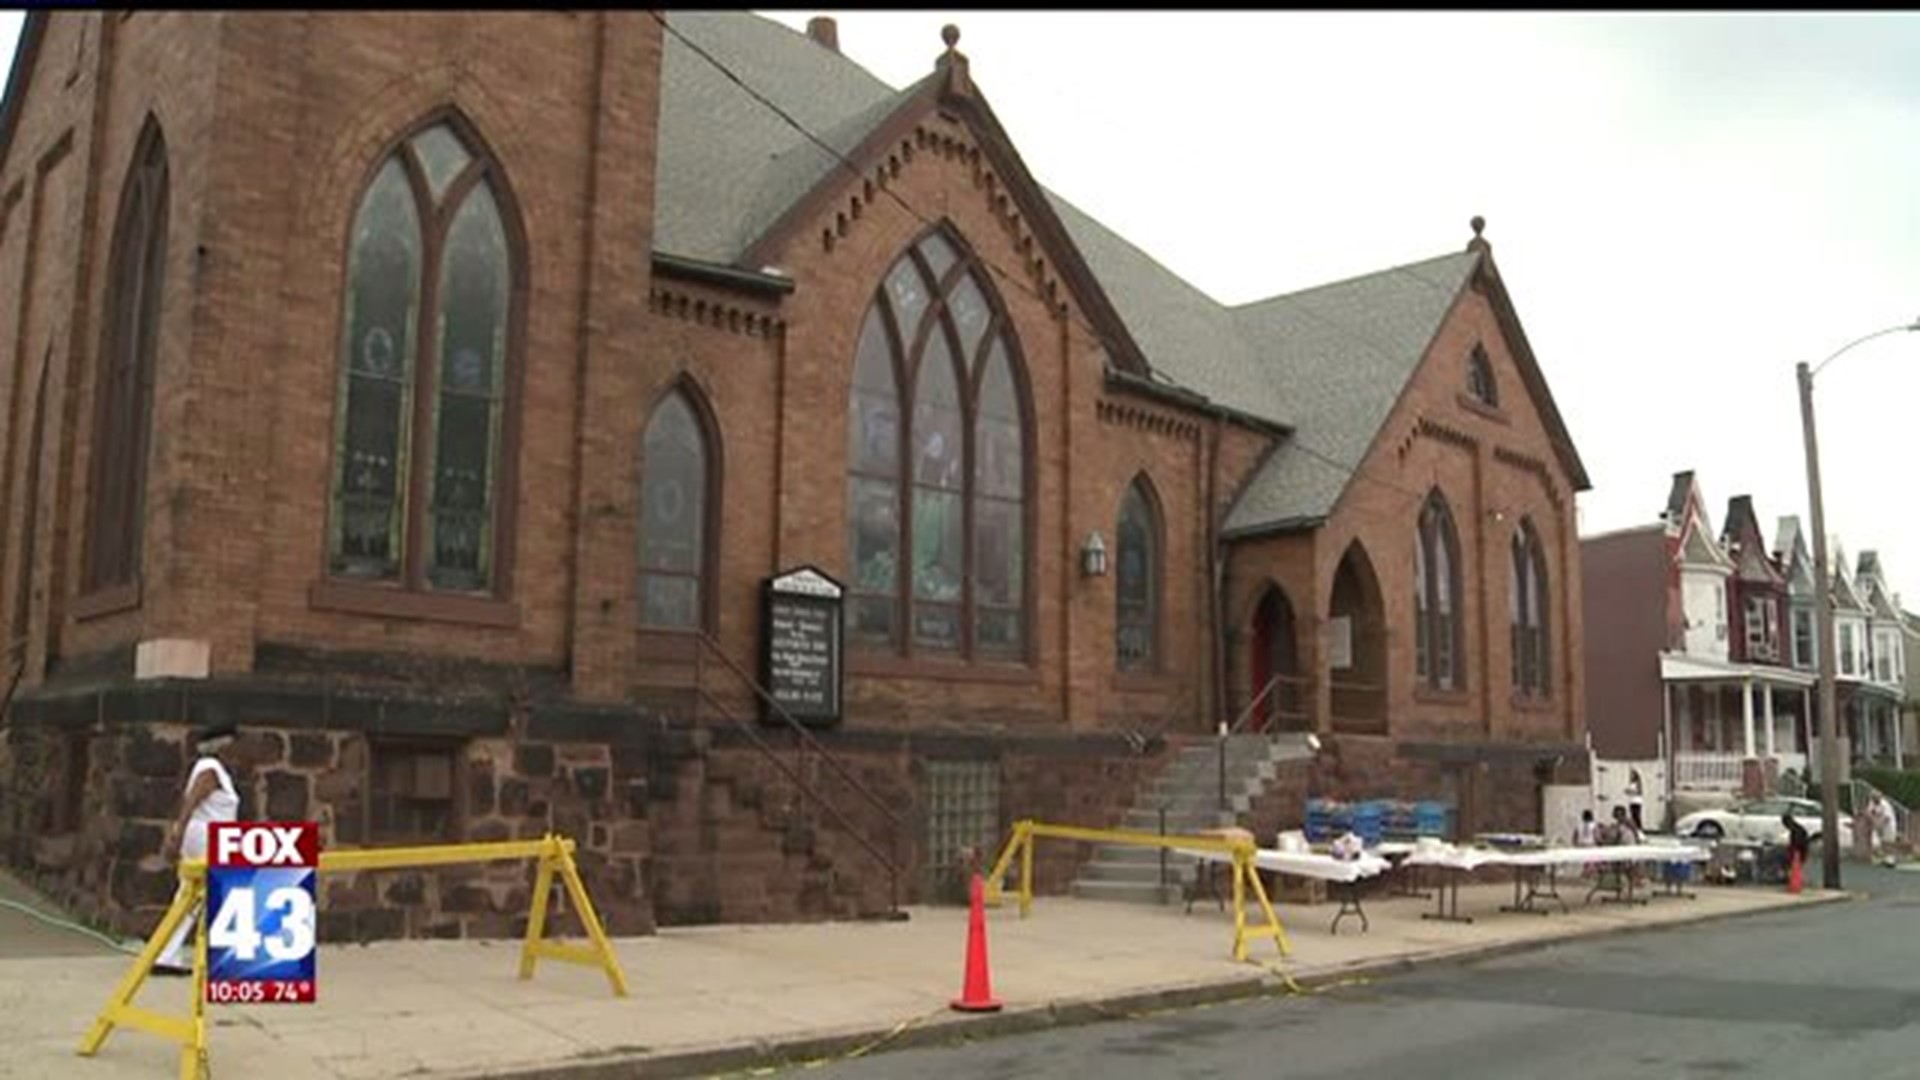 After Trinity Church Evacuation Parishioners Find Place to Worship